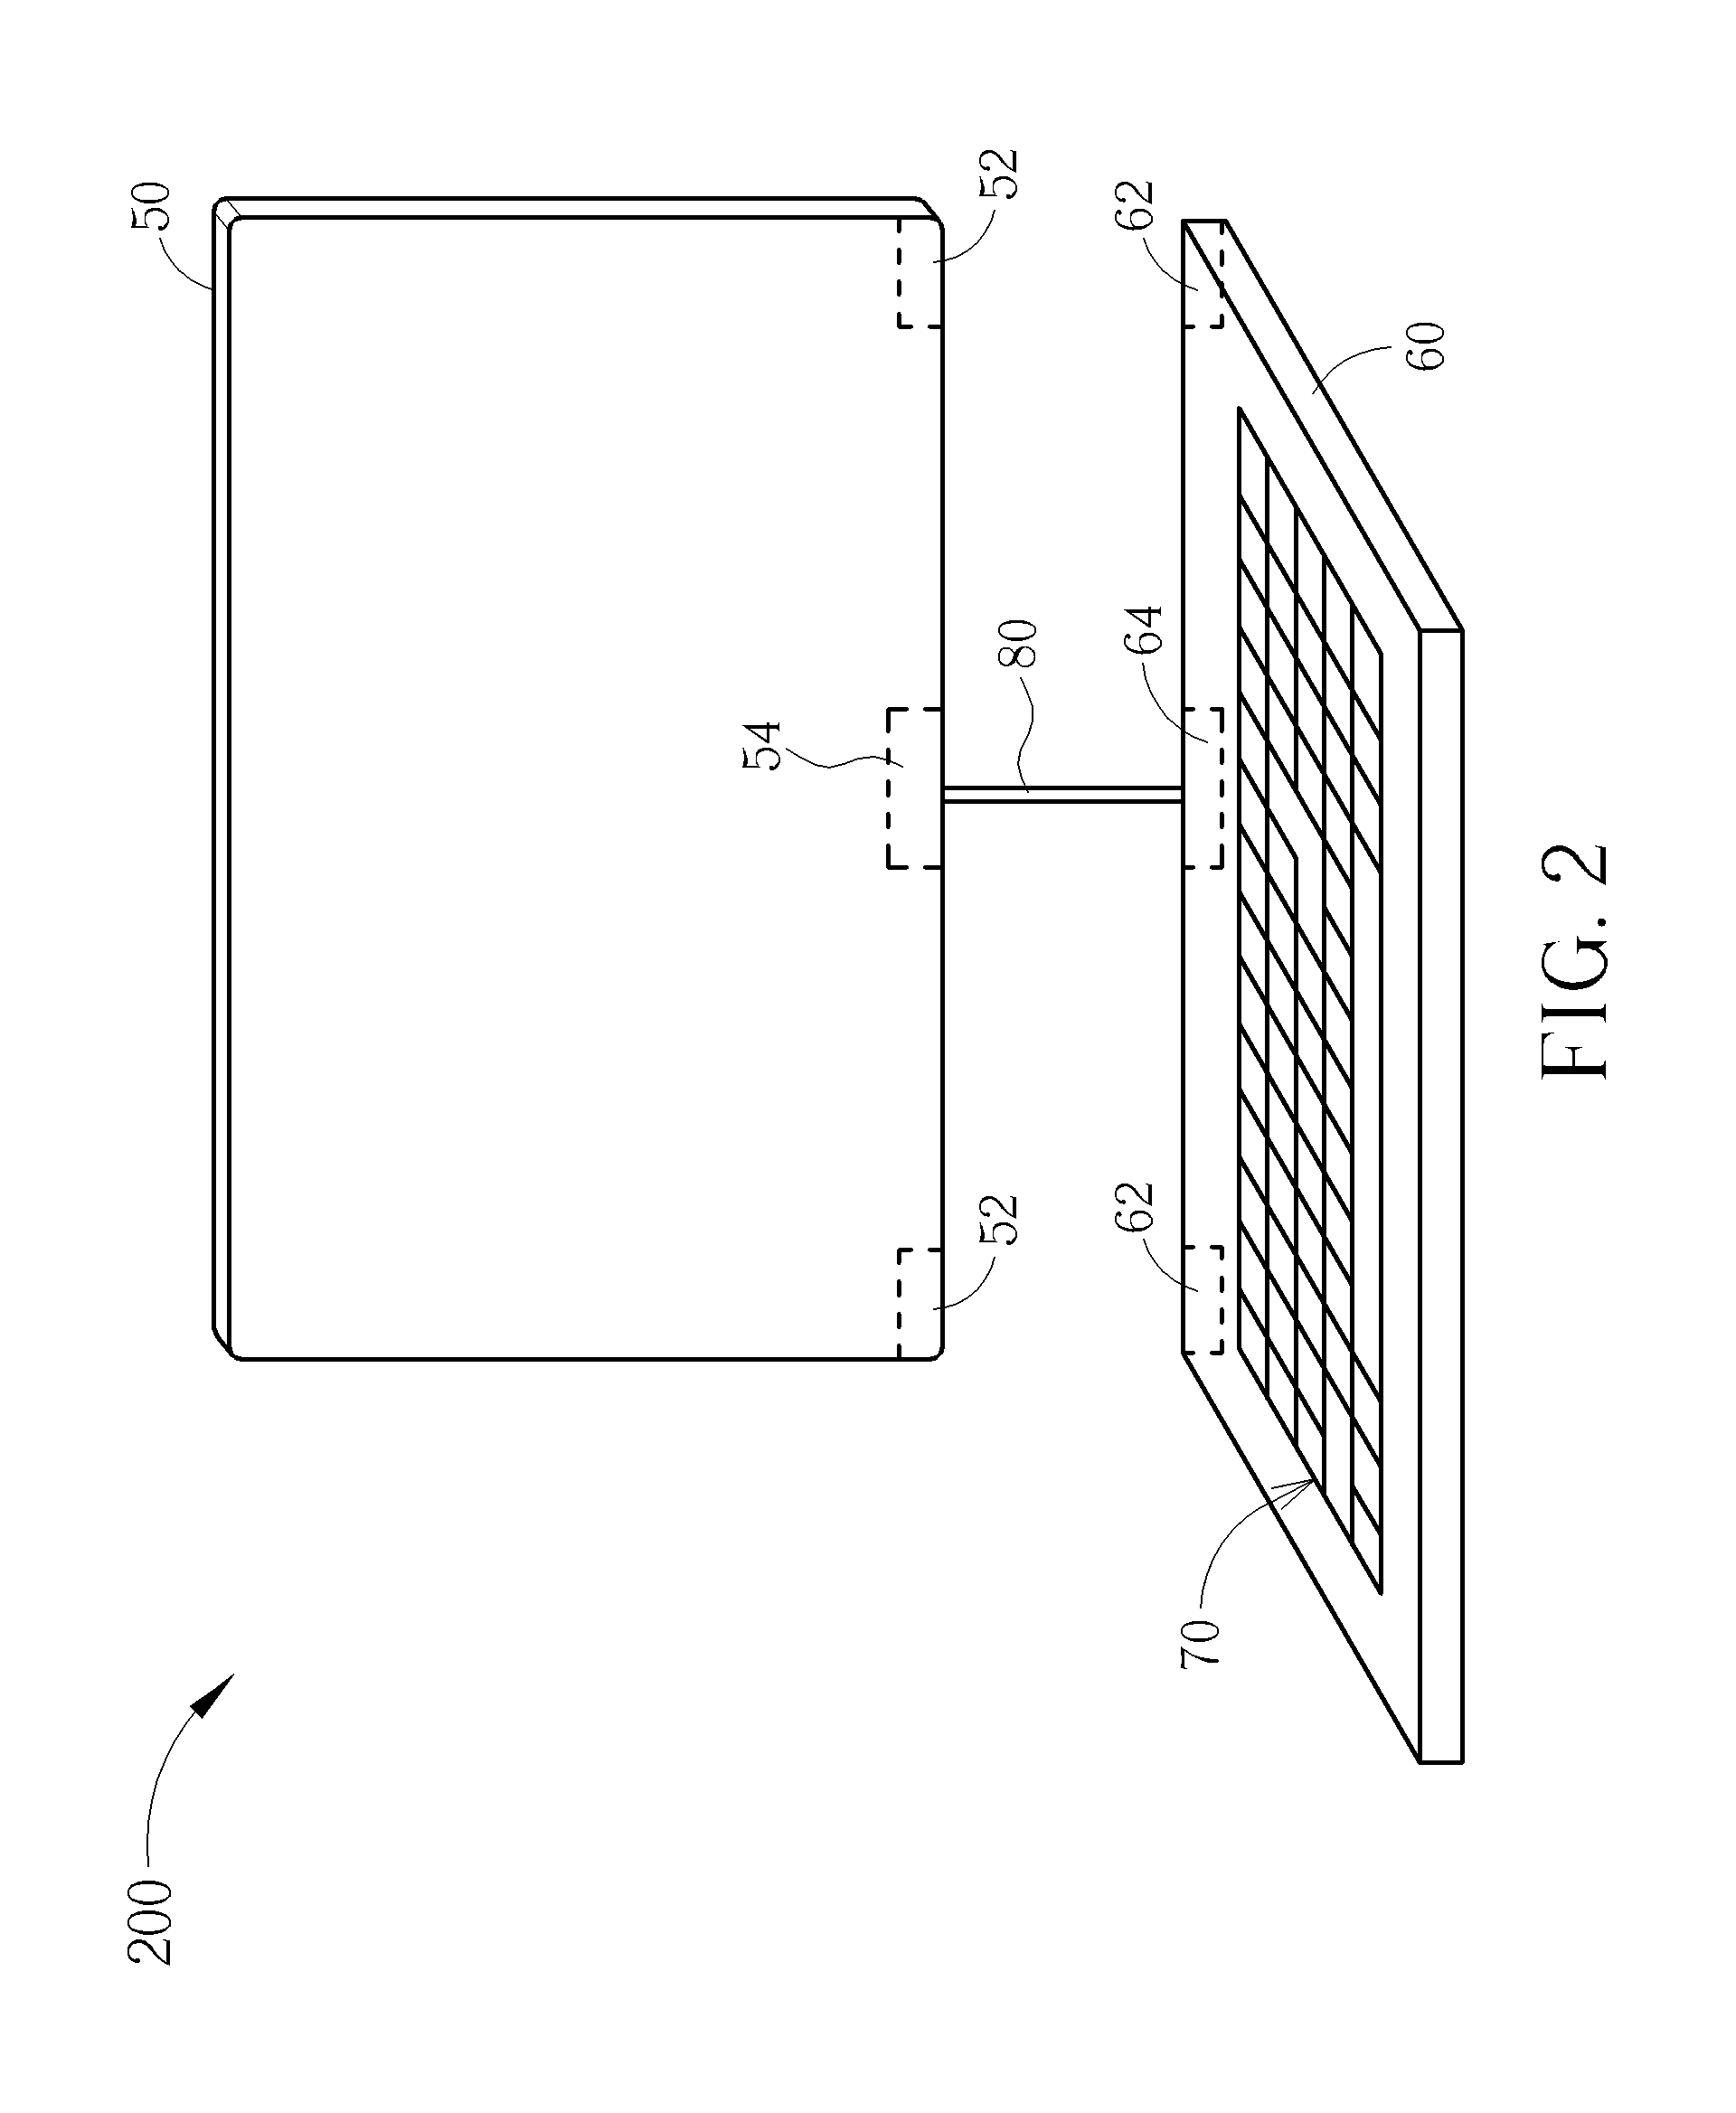 Display system having electrophoretic touch panel